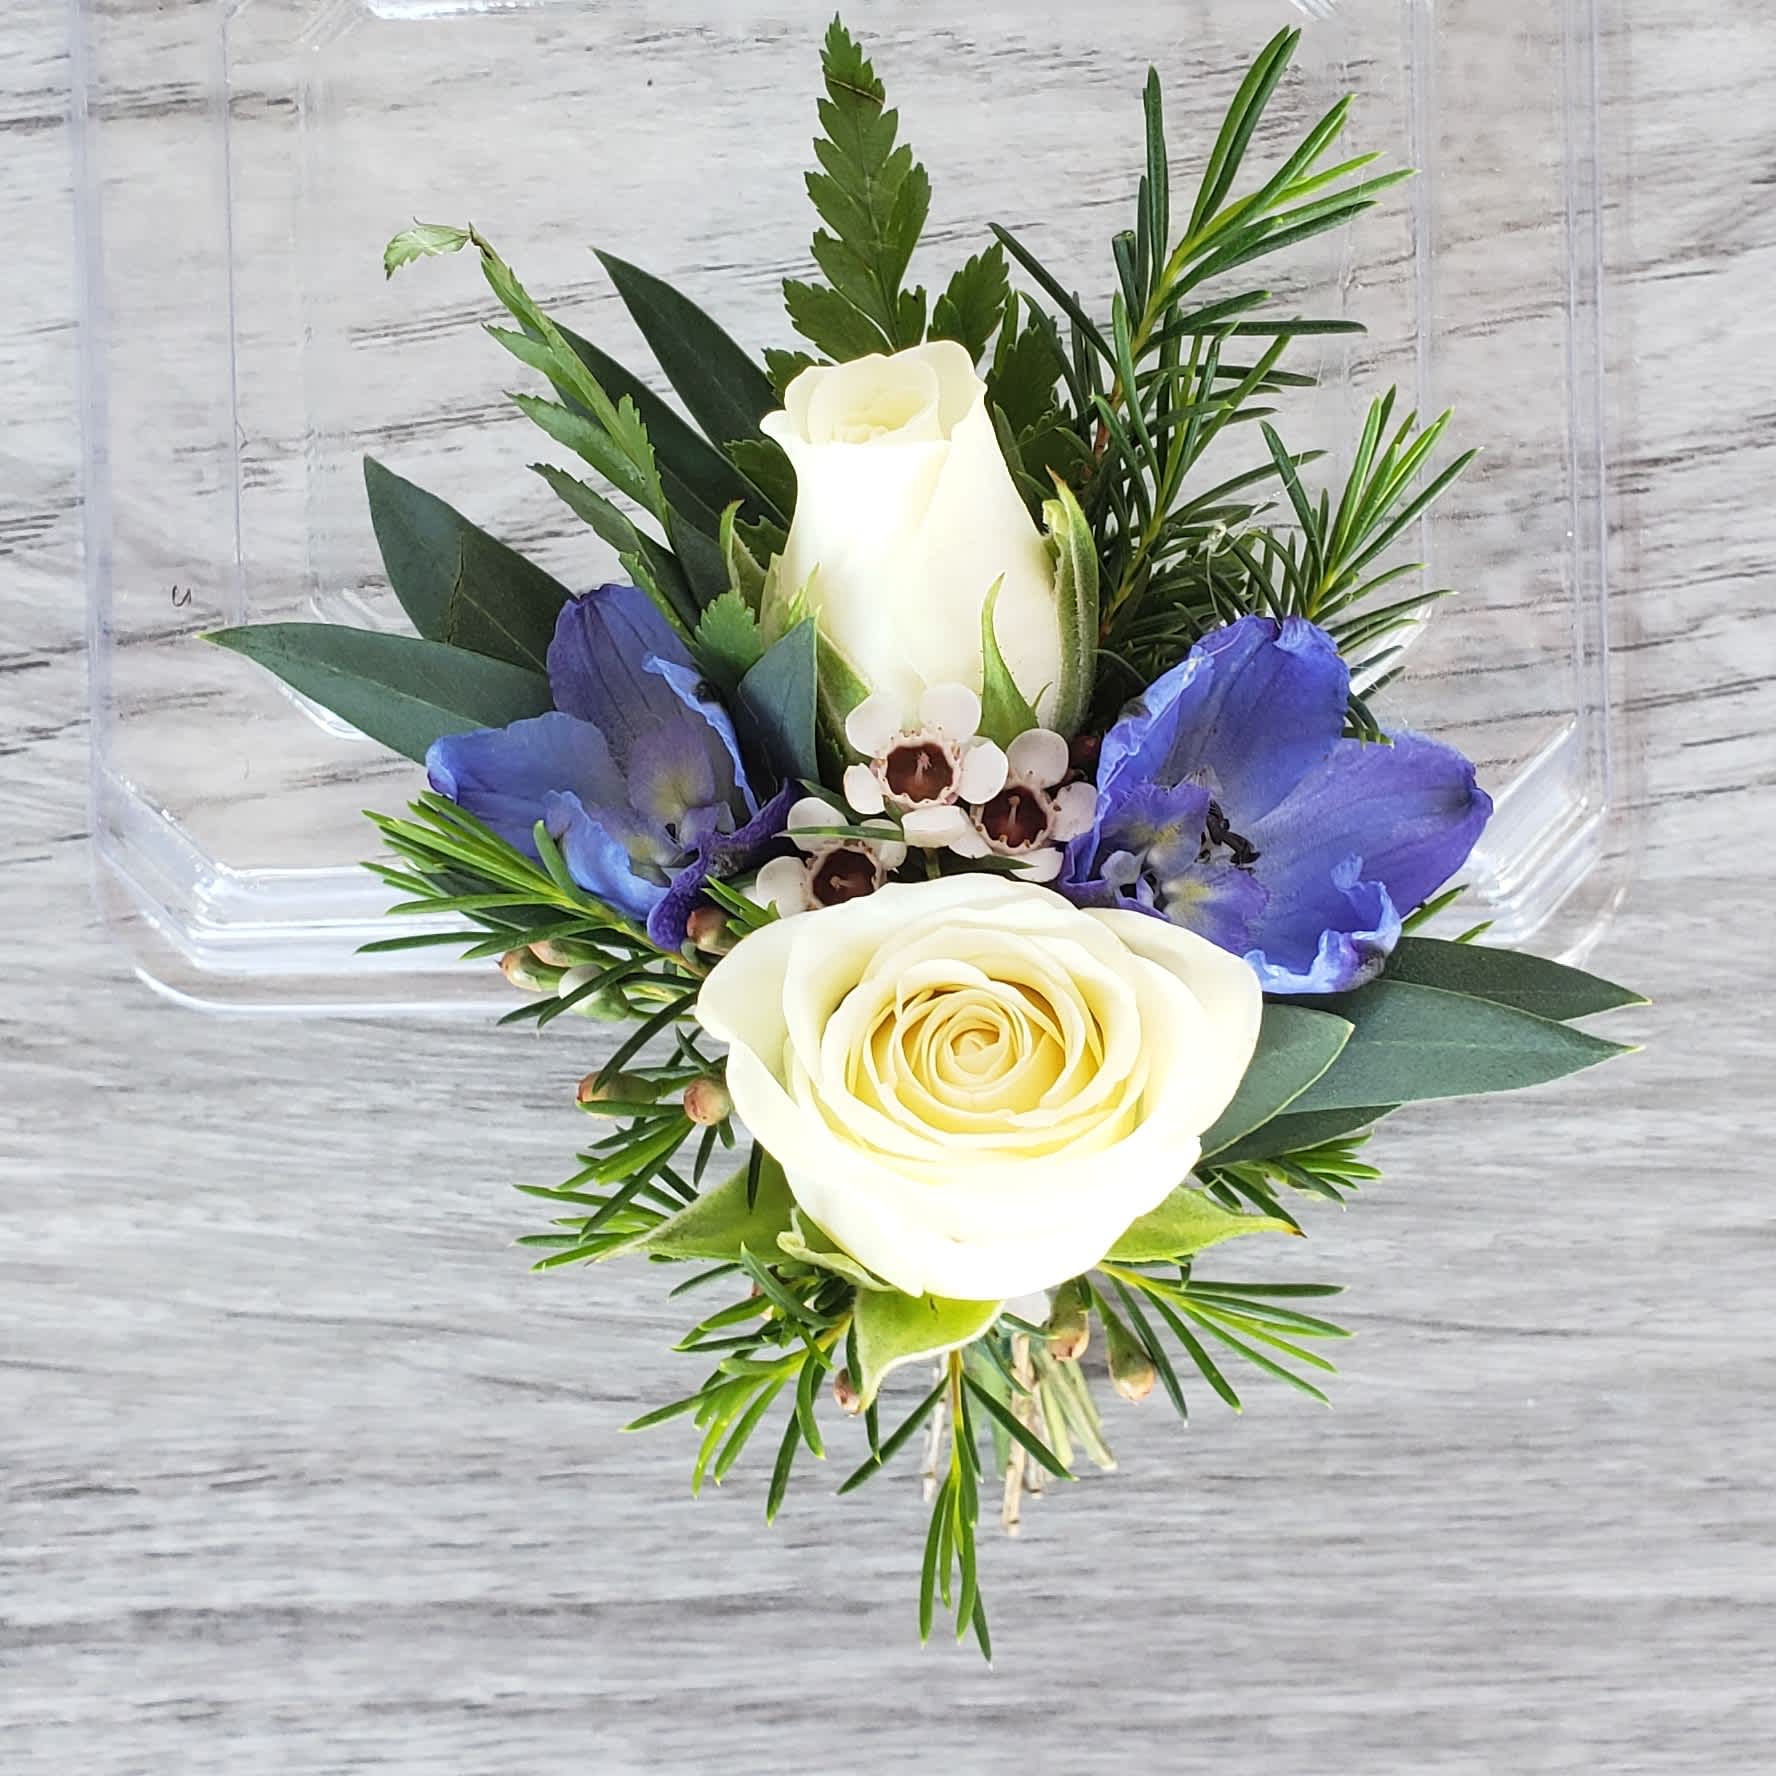 Blue and White Spray Rose Boutonniere - This Boutonniere features white spray roses, and delphinium with accent flowers and greenery. If you would like to exchange the colors of the flowers or ribbon please let us know and we will be happy to accommodate.